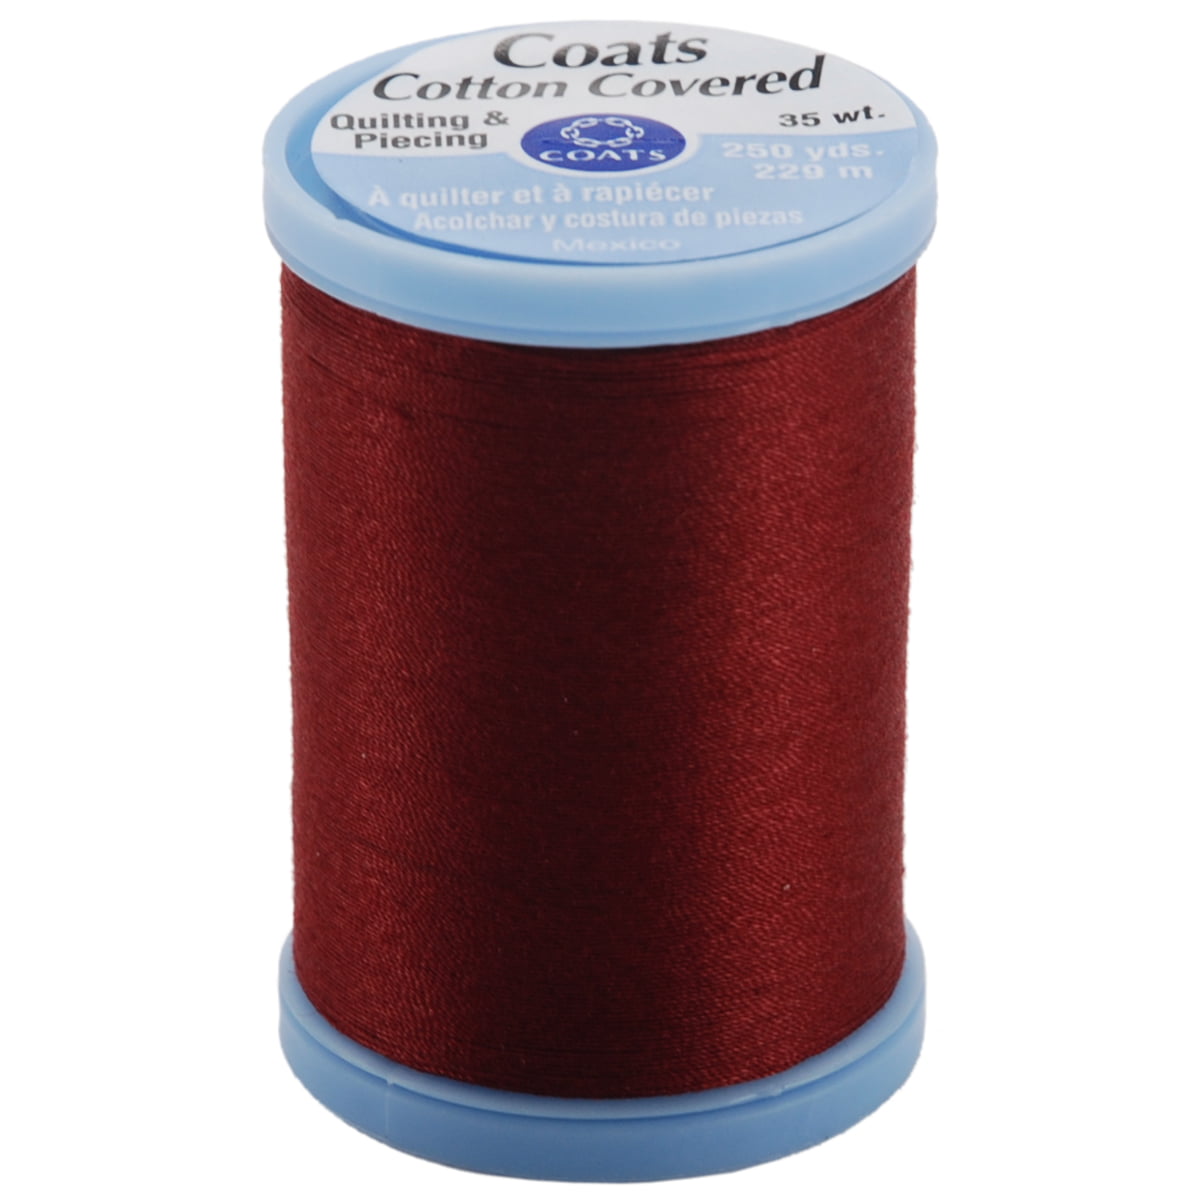 Dogwood Thread & Zippers Cotton Covered Quilting and Piecing Thread 250-Yard Coats 